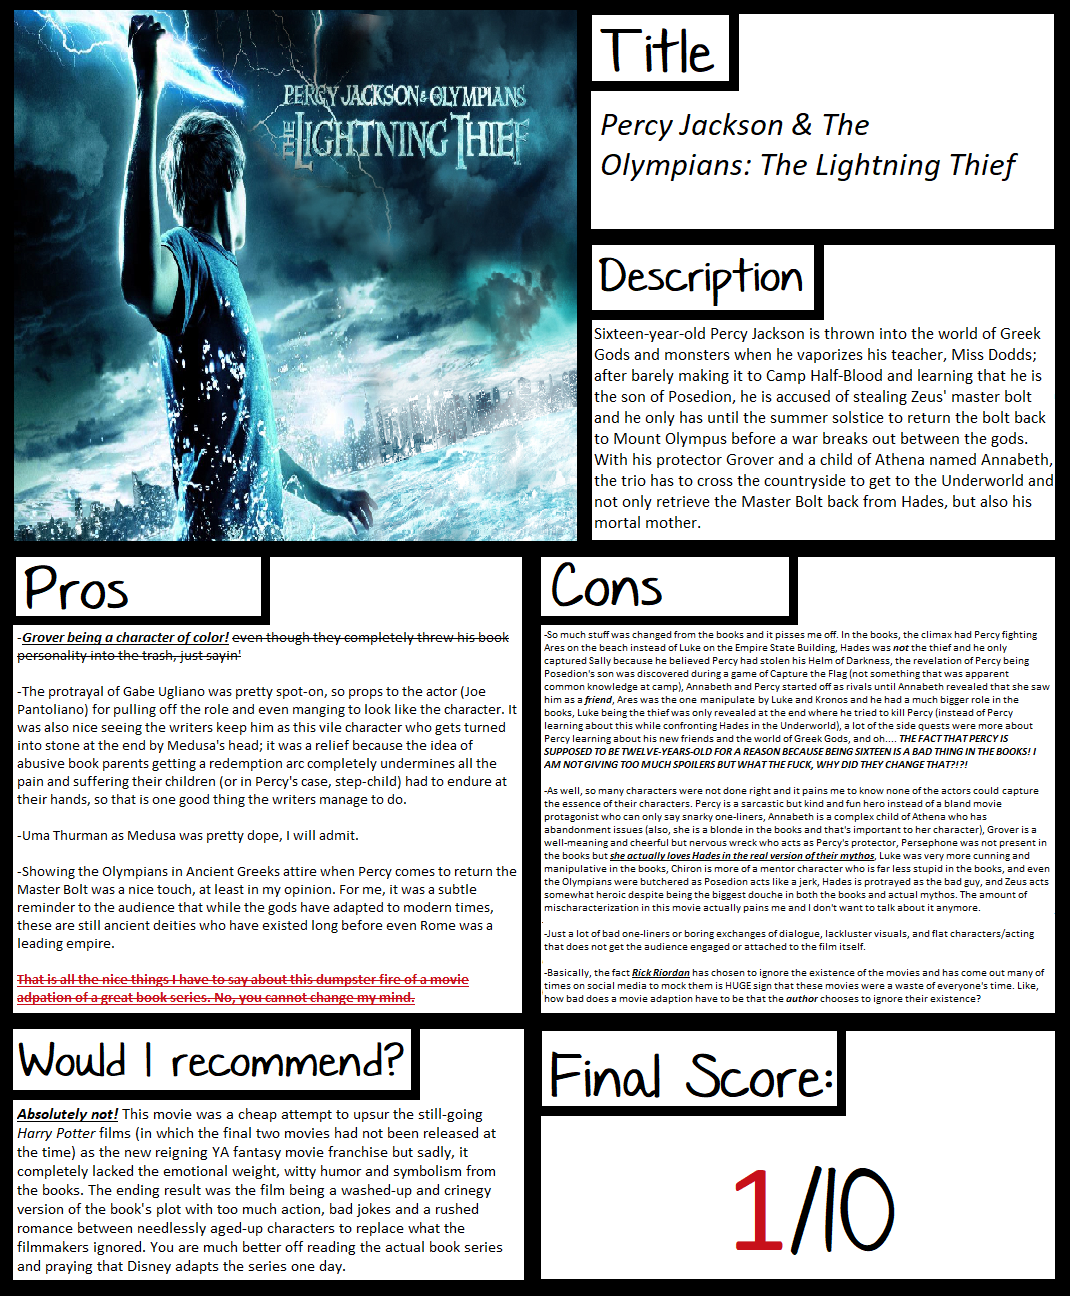 Pros and Cons: The Lightning Thief (film) by The-Moon-Witch on DeviantArt